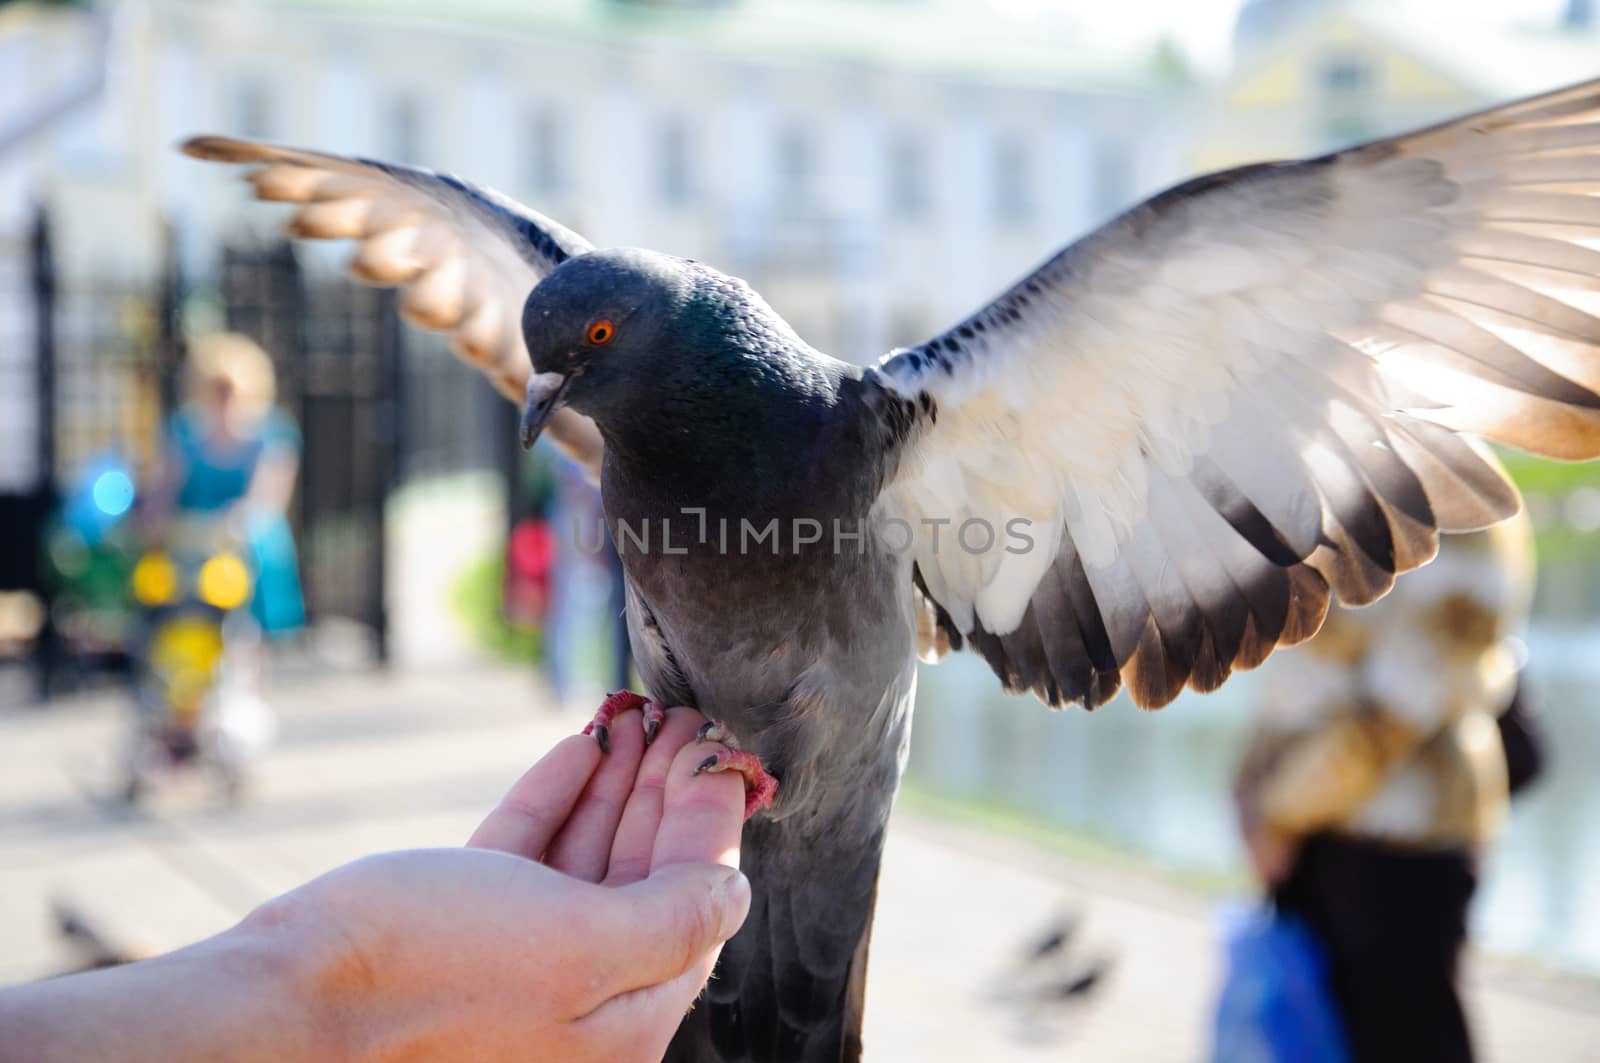 Pigeon sitting on the hand with stretched wings close-up, Sergie by Eagle2308